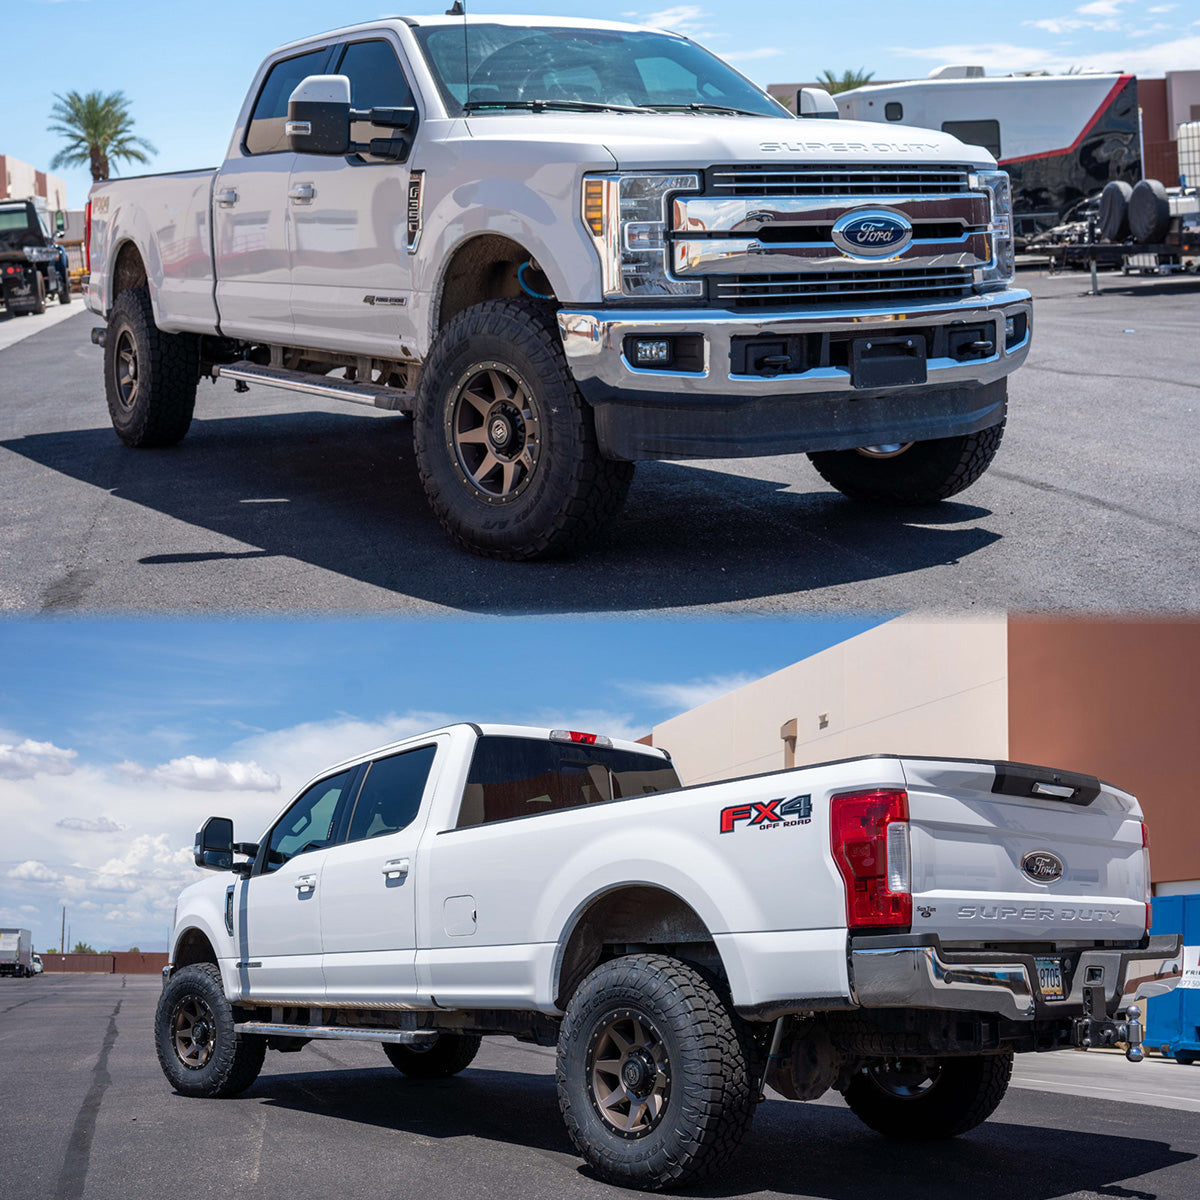 Jesse's SDHQ Built Carli Equipped Ford F-350